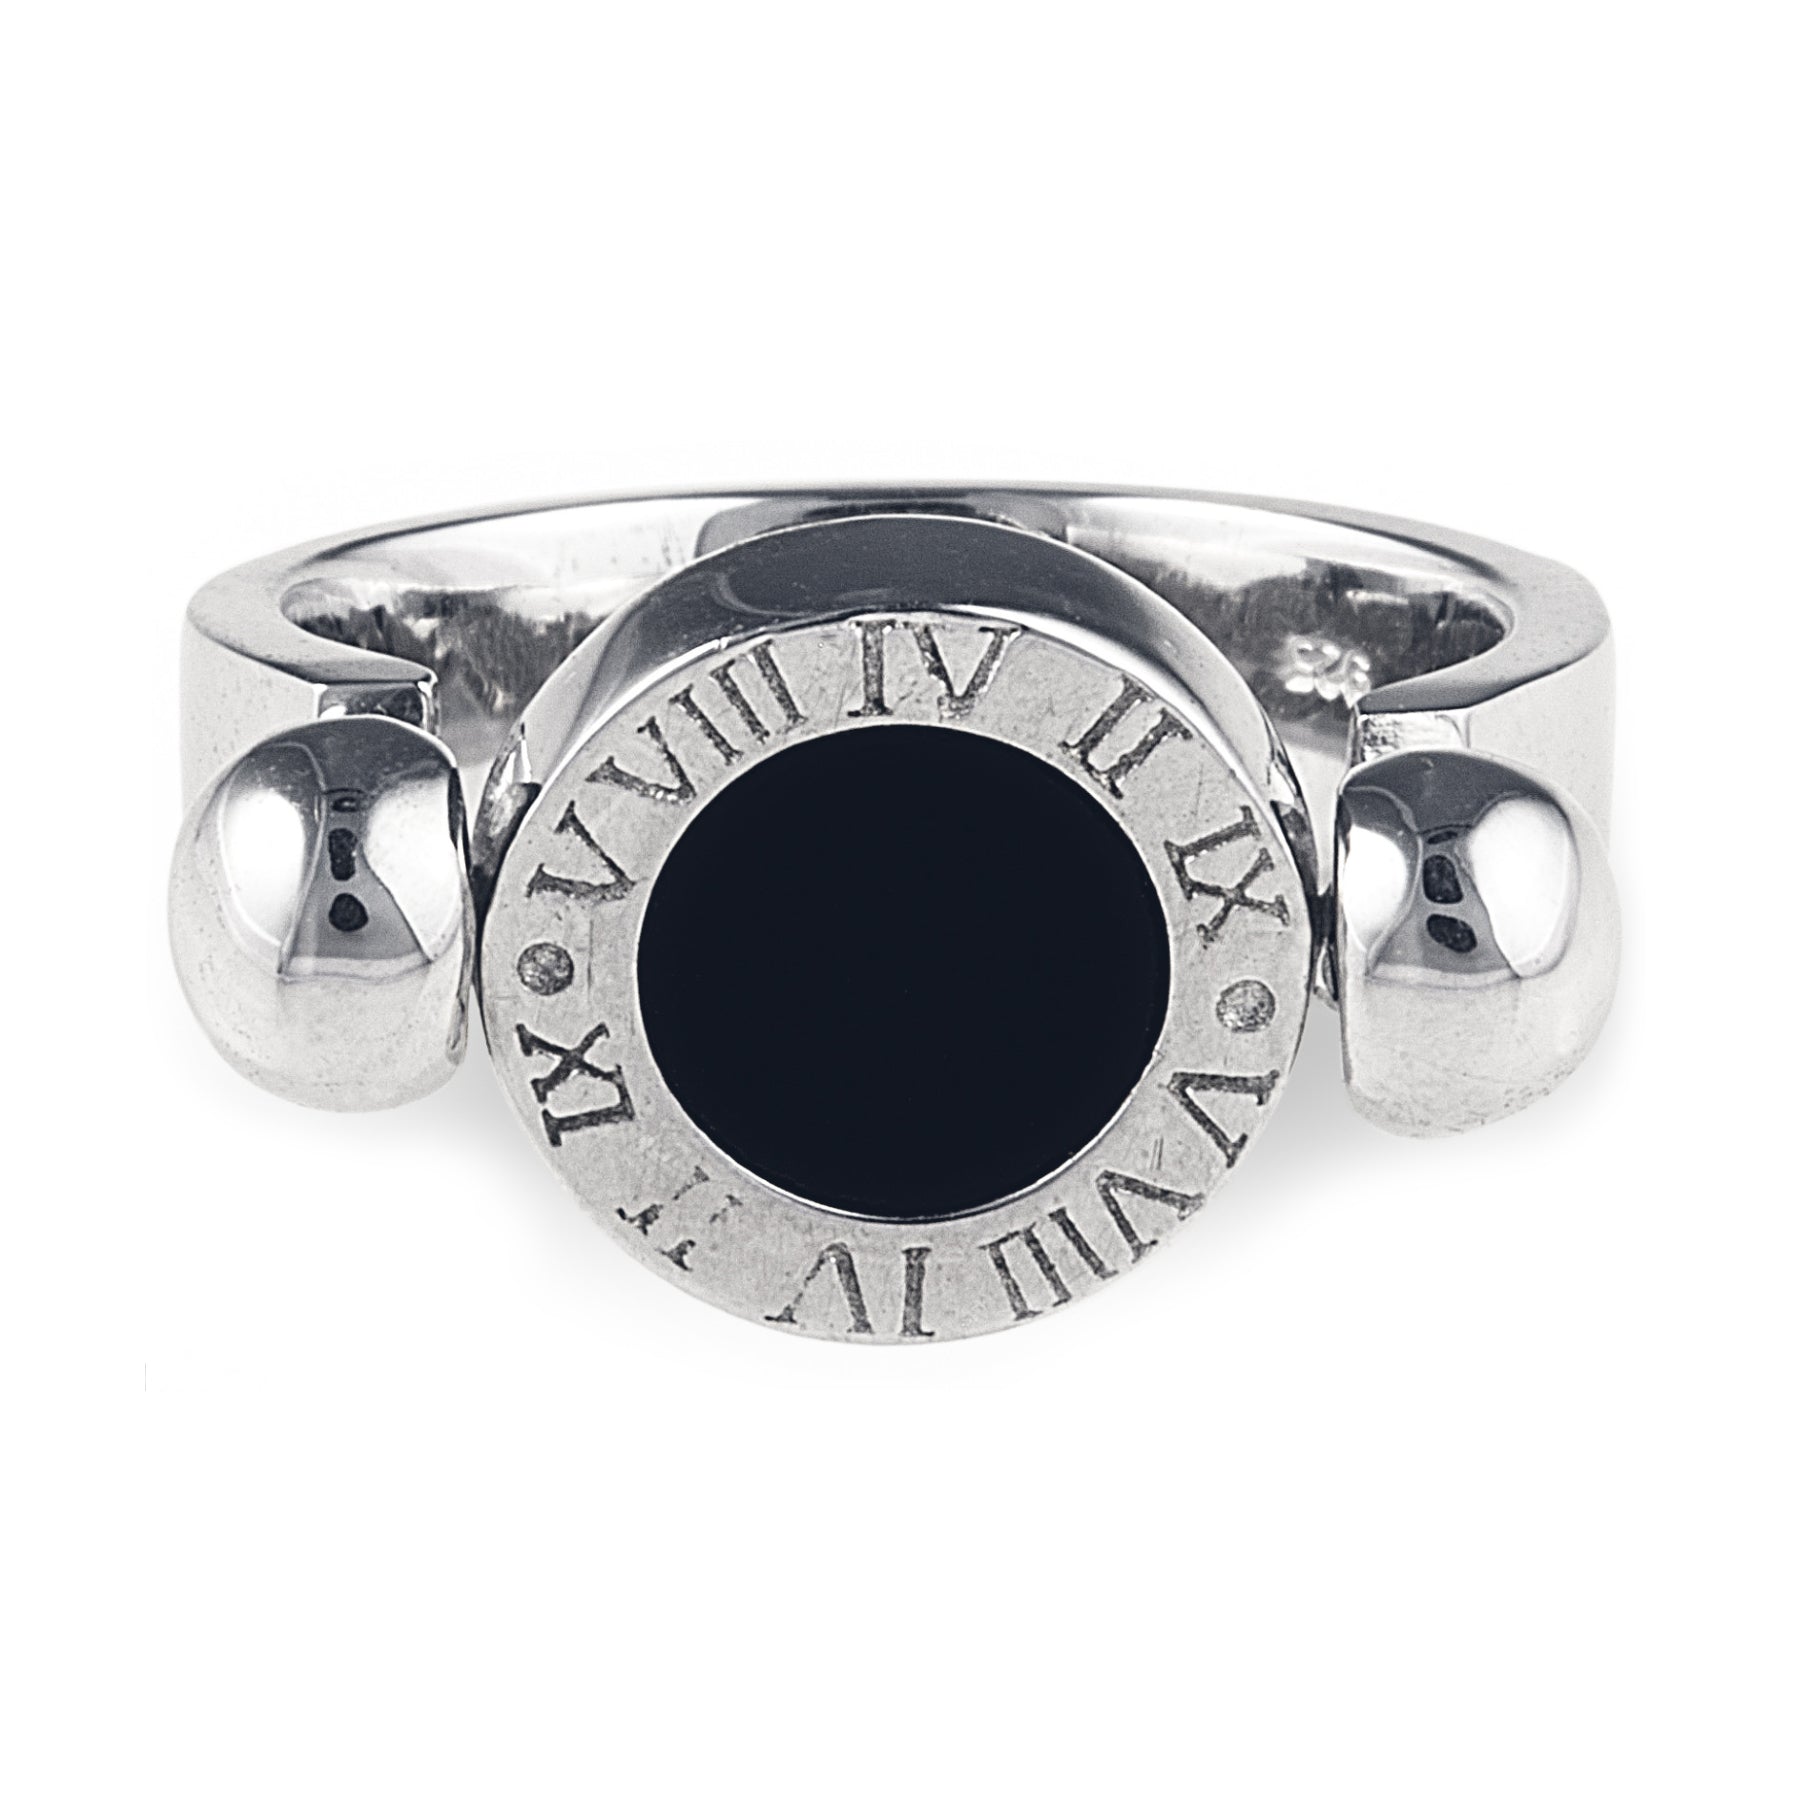 Sasha Fierce Ring in 925 Sterling Silver with double sided feature, black onyx and cubic zirconia surrounded by Roman numerals. Worldwide shipping.